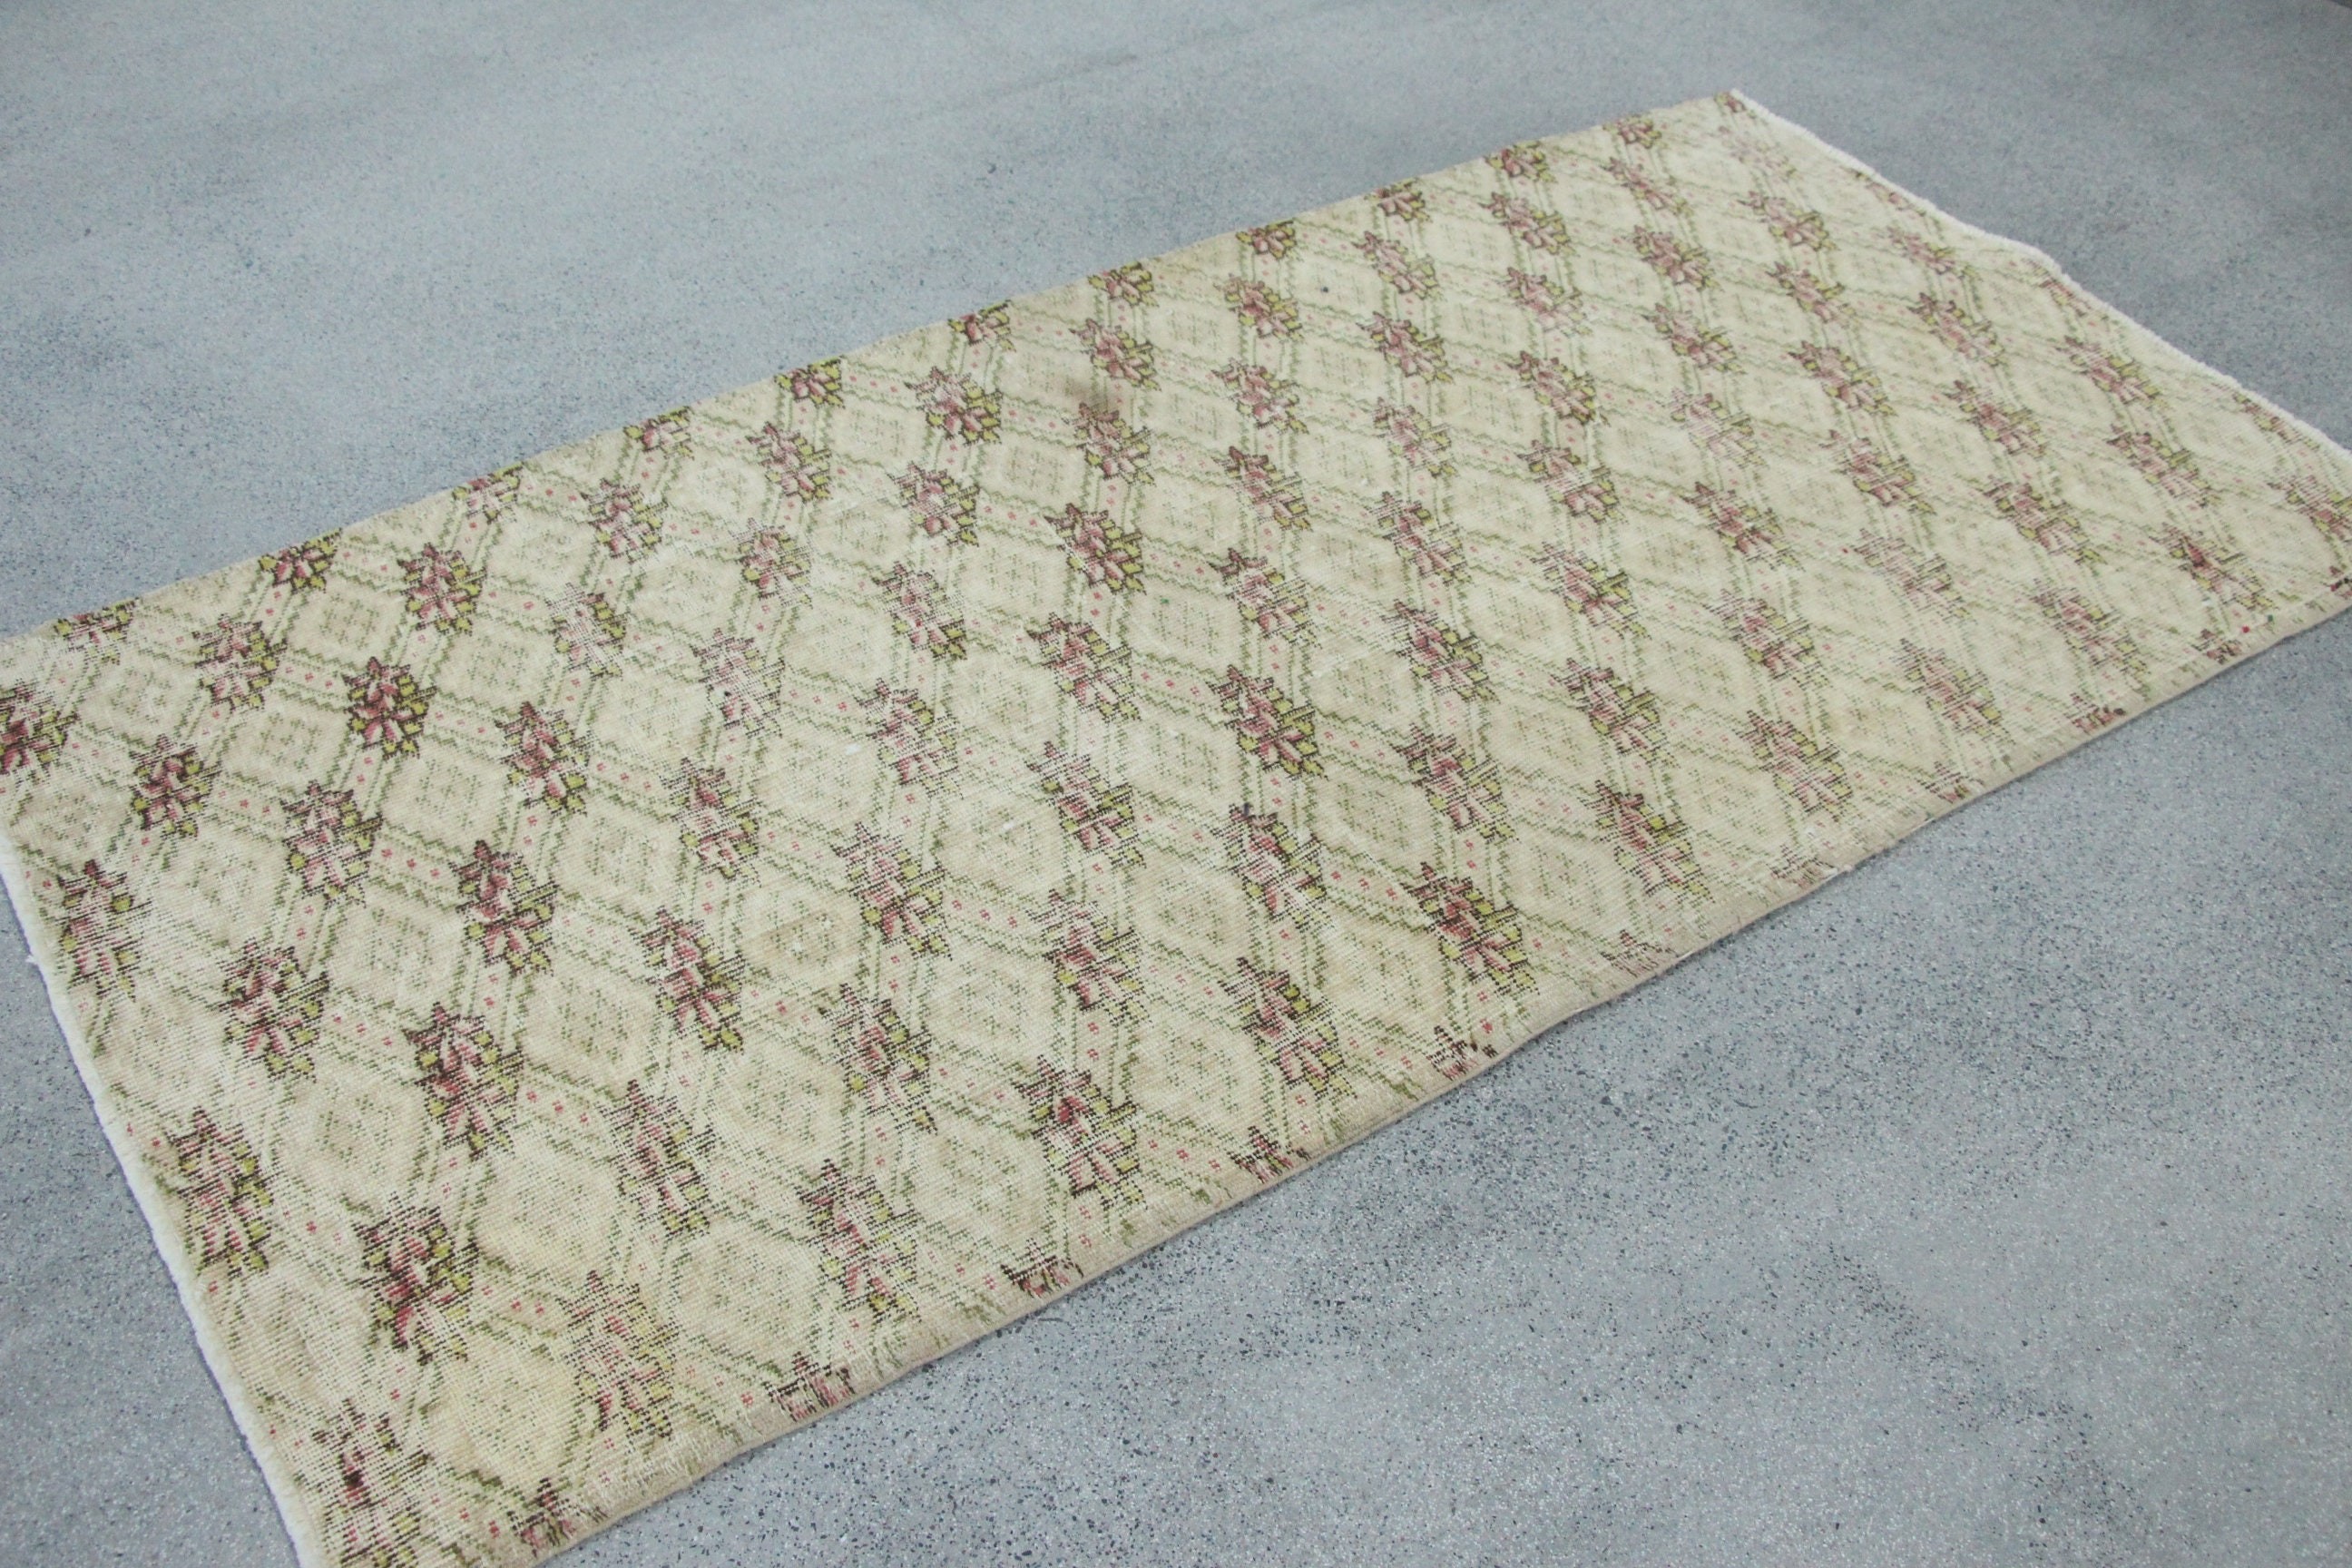 Rugs for Entry, Beige Wool Rug, Vintage Rug, Kitchen Rug, 3.3x6.6 ft Accent Rug, Bedroom Rugs, Moroccan Rug, Home Decor Rug, Turkish Rugs